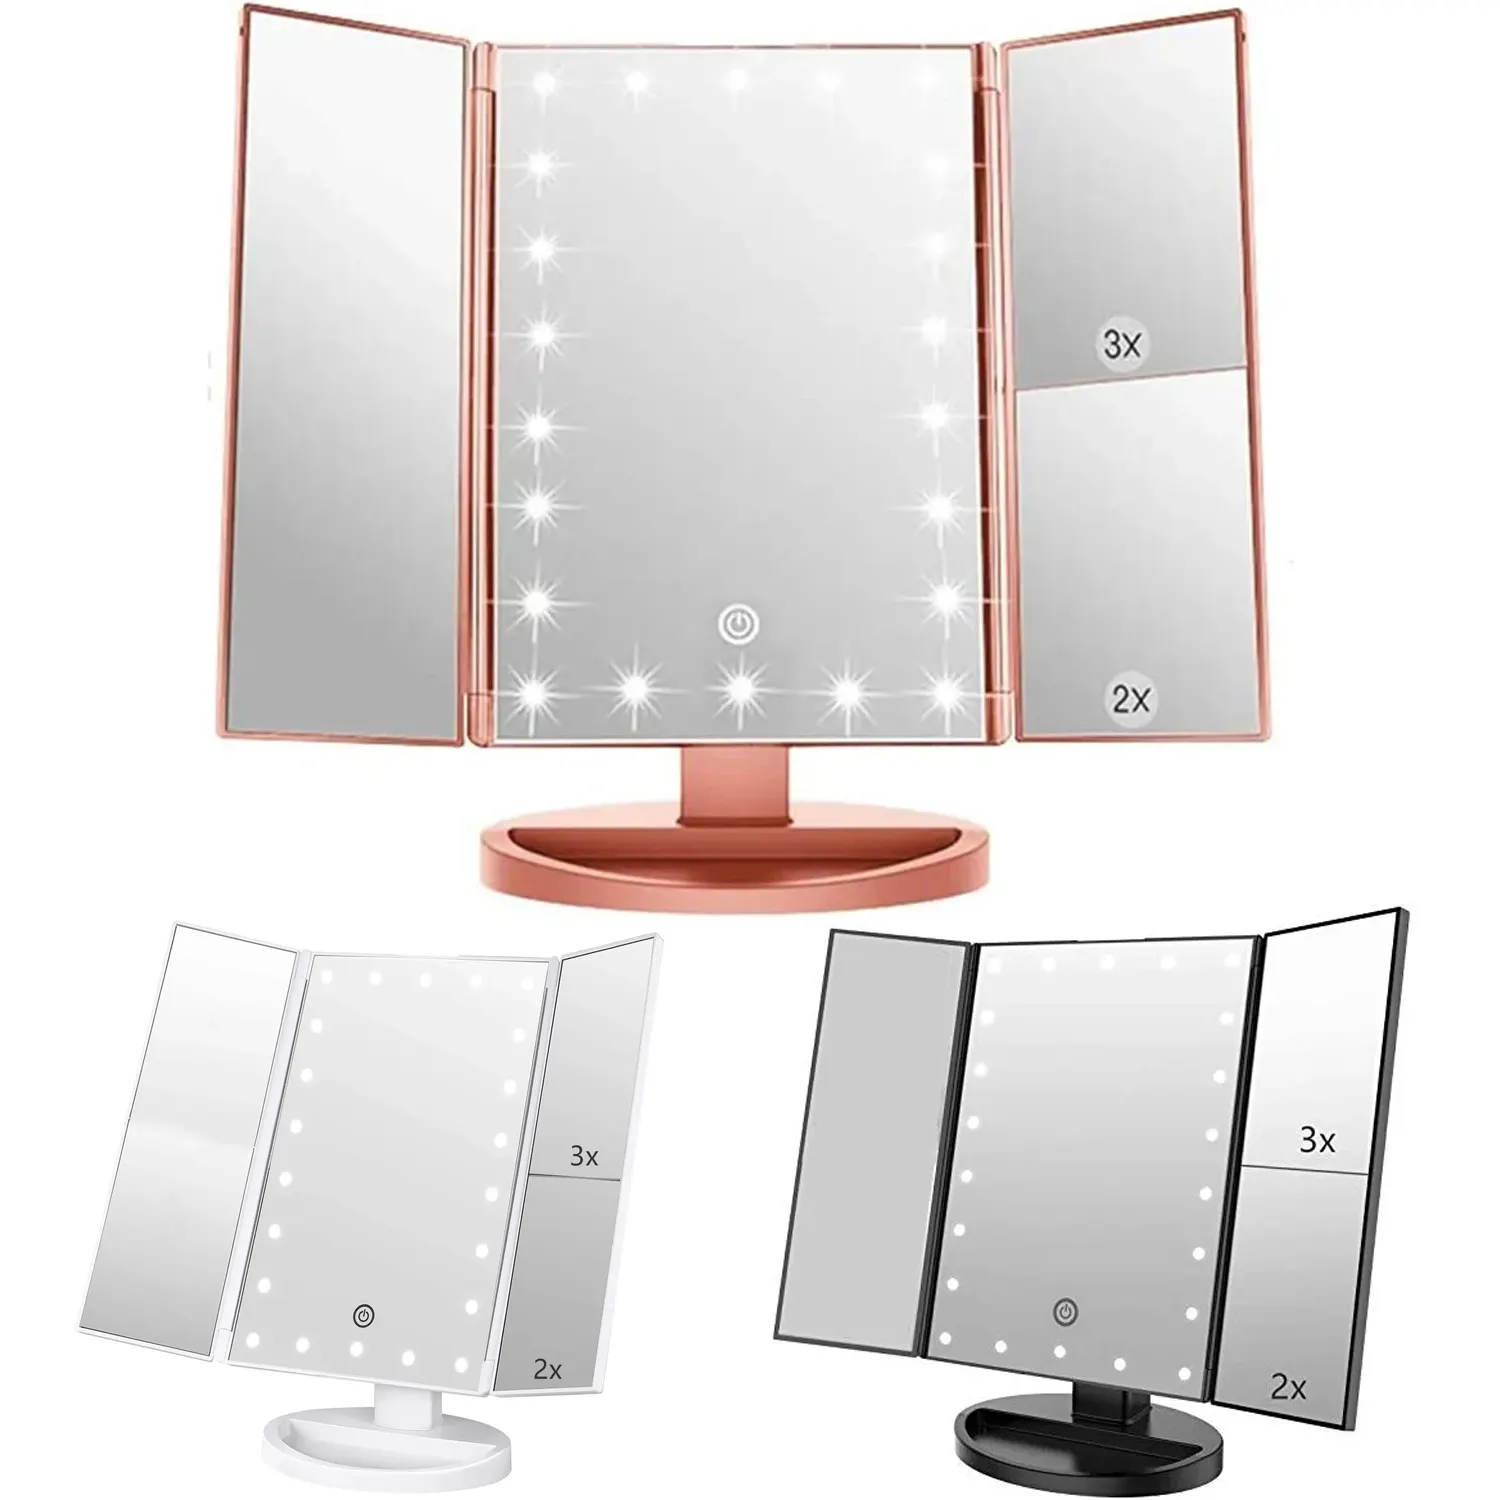 Factory Wholesale Vanity Mirror with Lights Magnification Trifold Makeup Mirror 22 LED Lights Women Gift Led Makeup Mirror